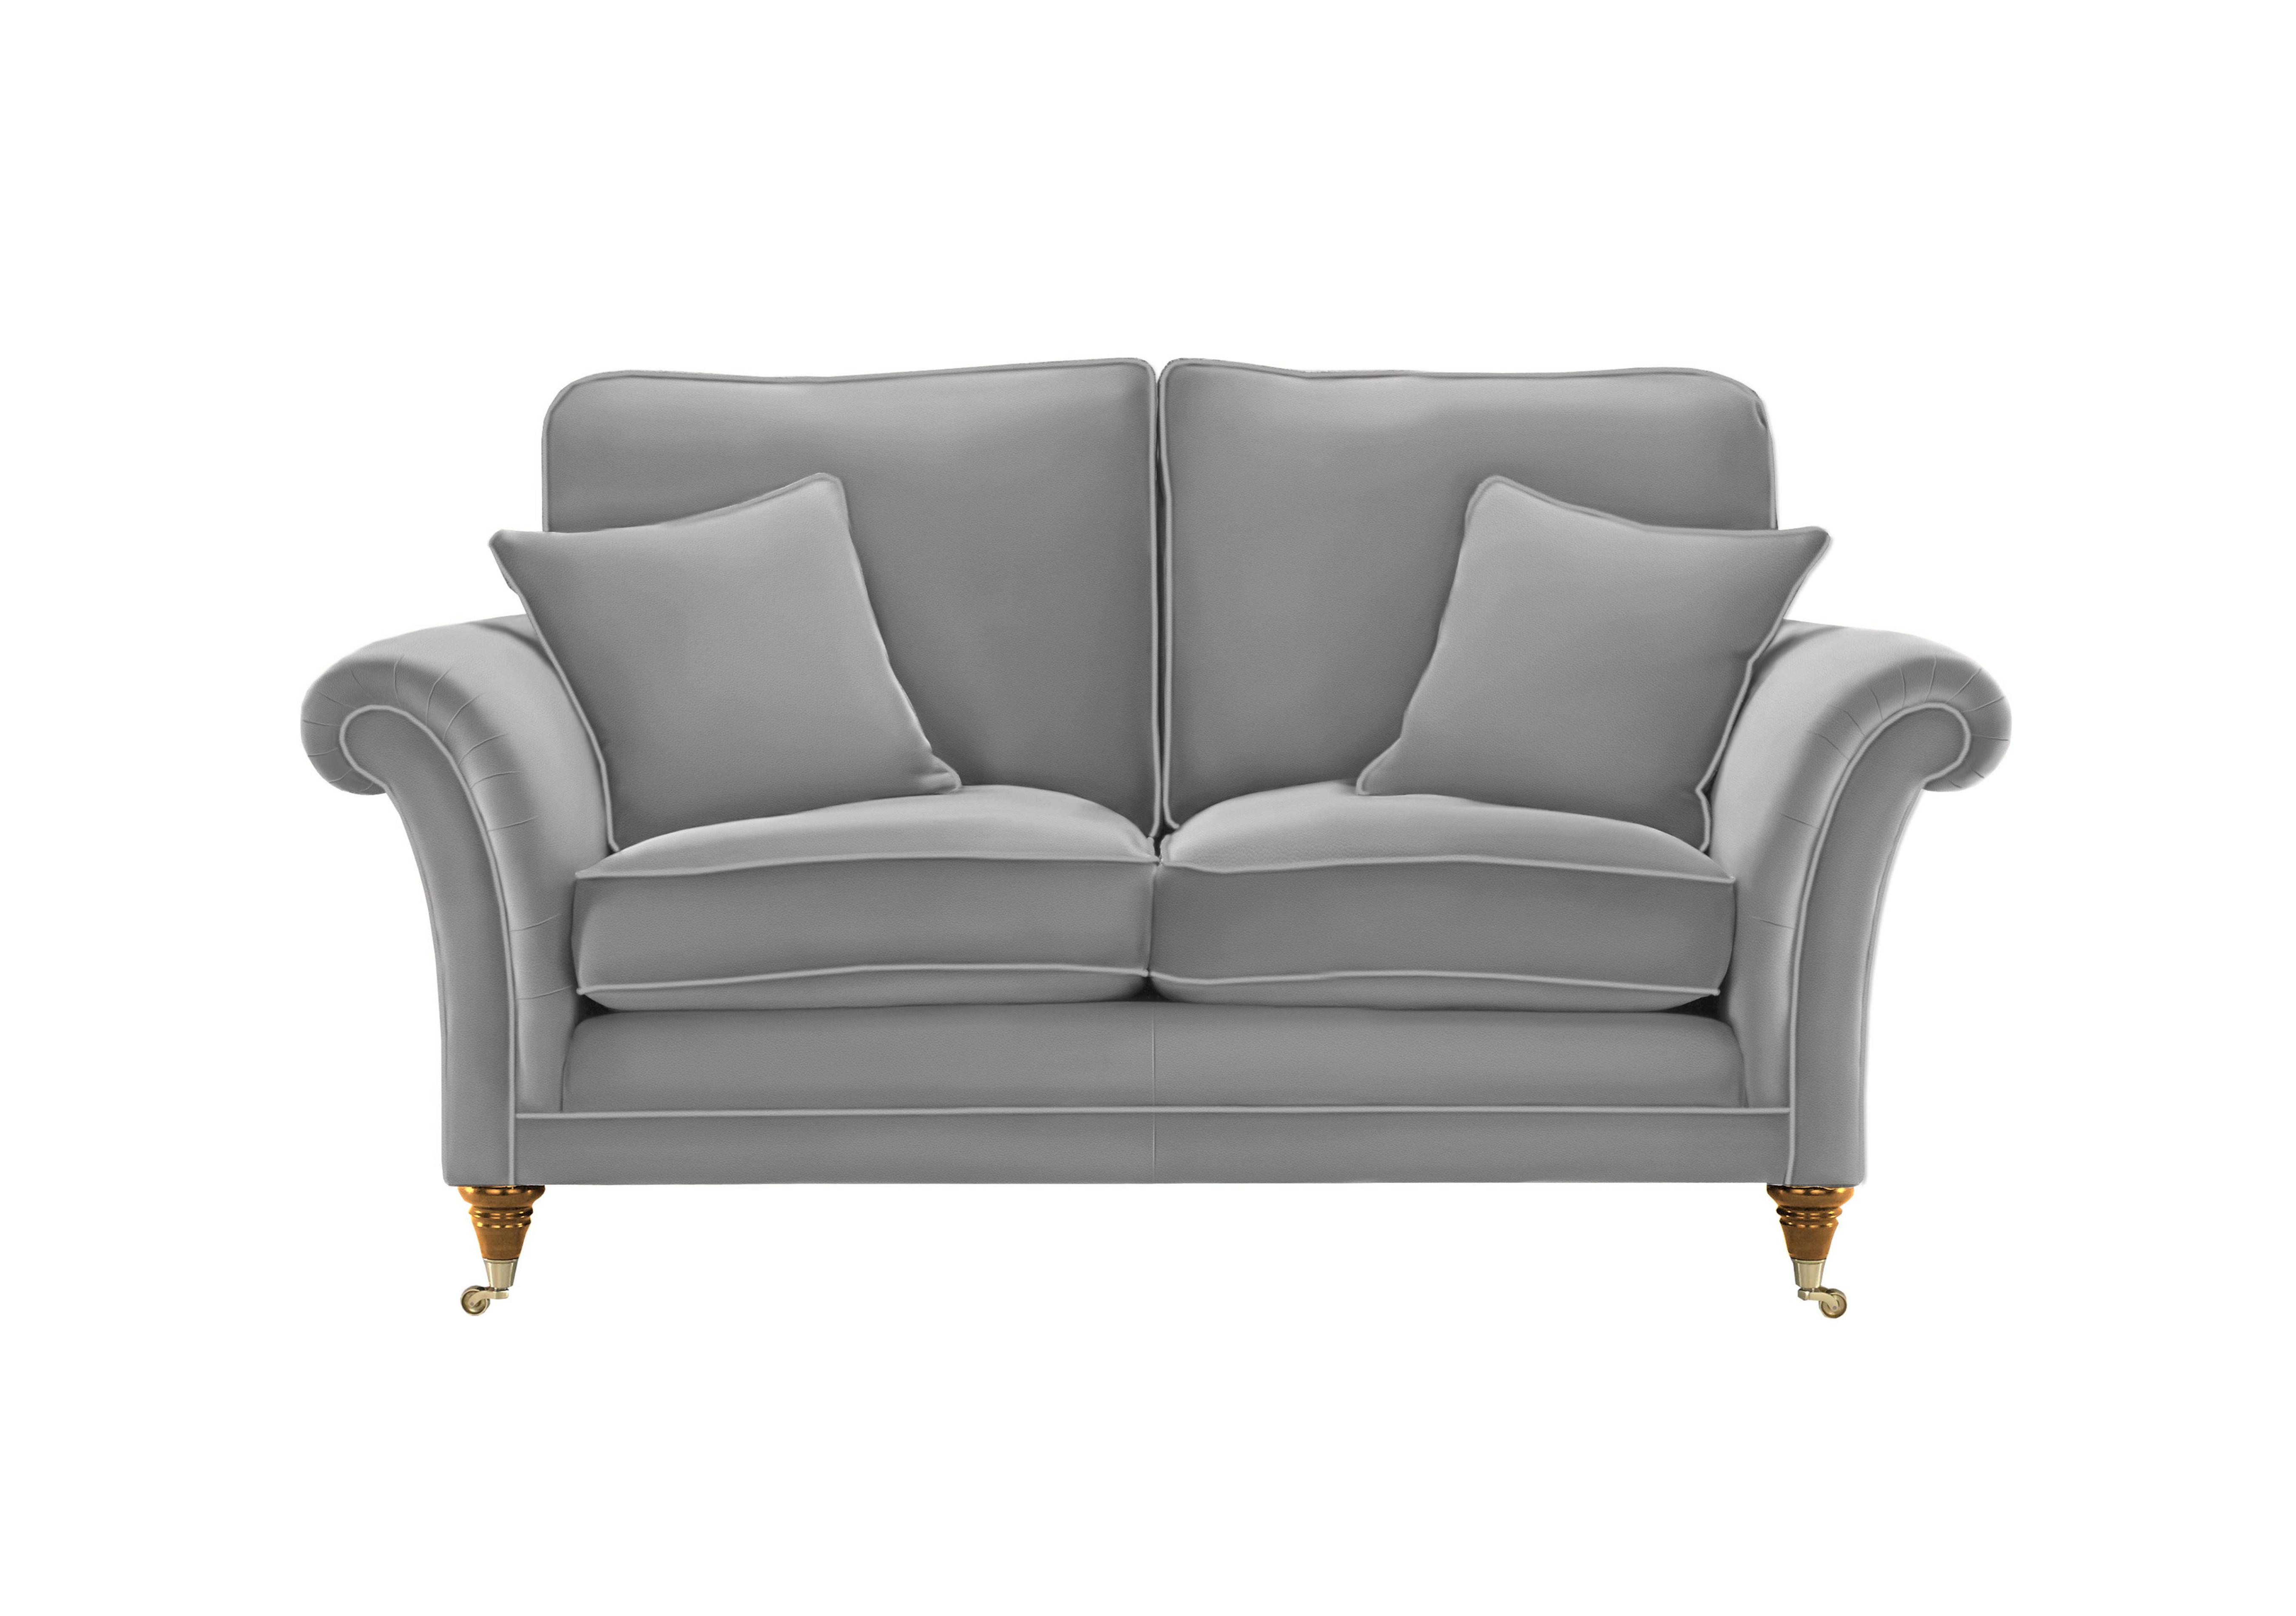 Burghley 2 Seater Leather Sofa in 009019-0092 Roma Steel on Furniture Village